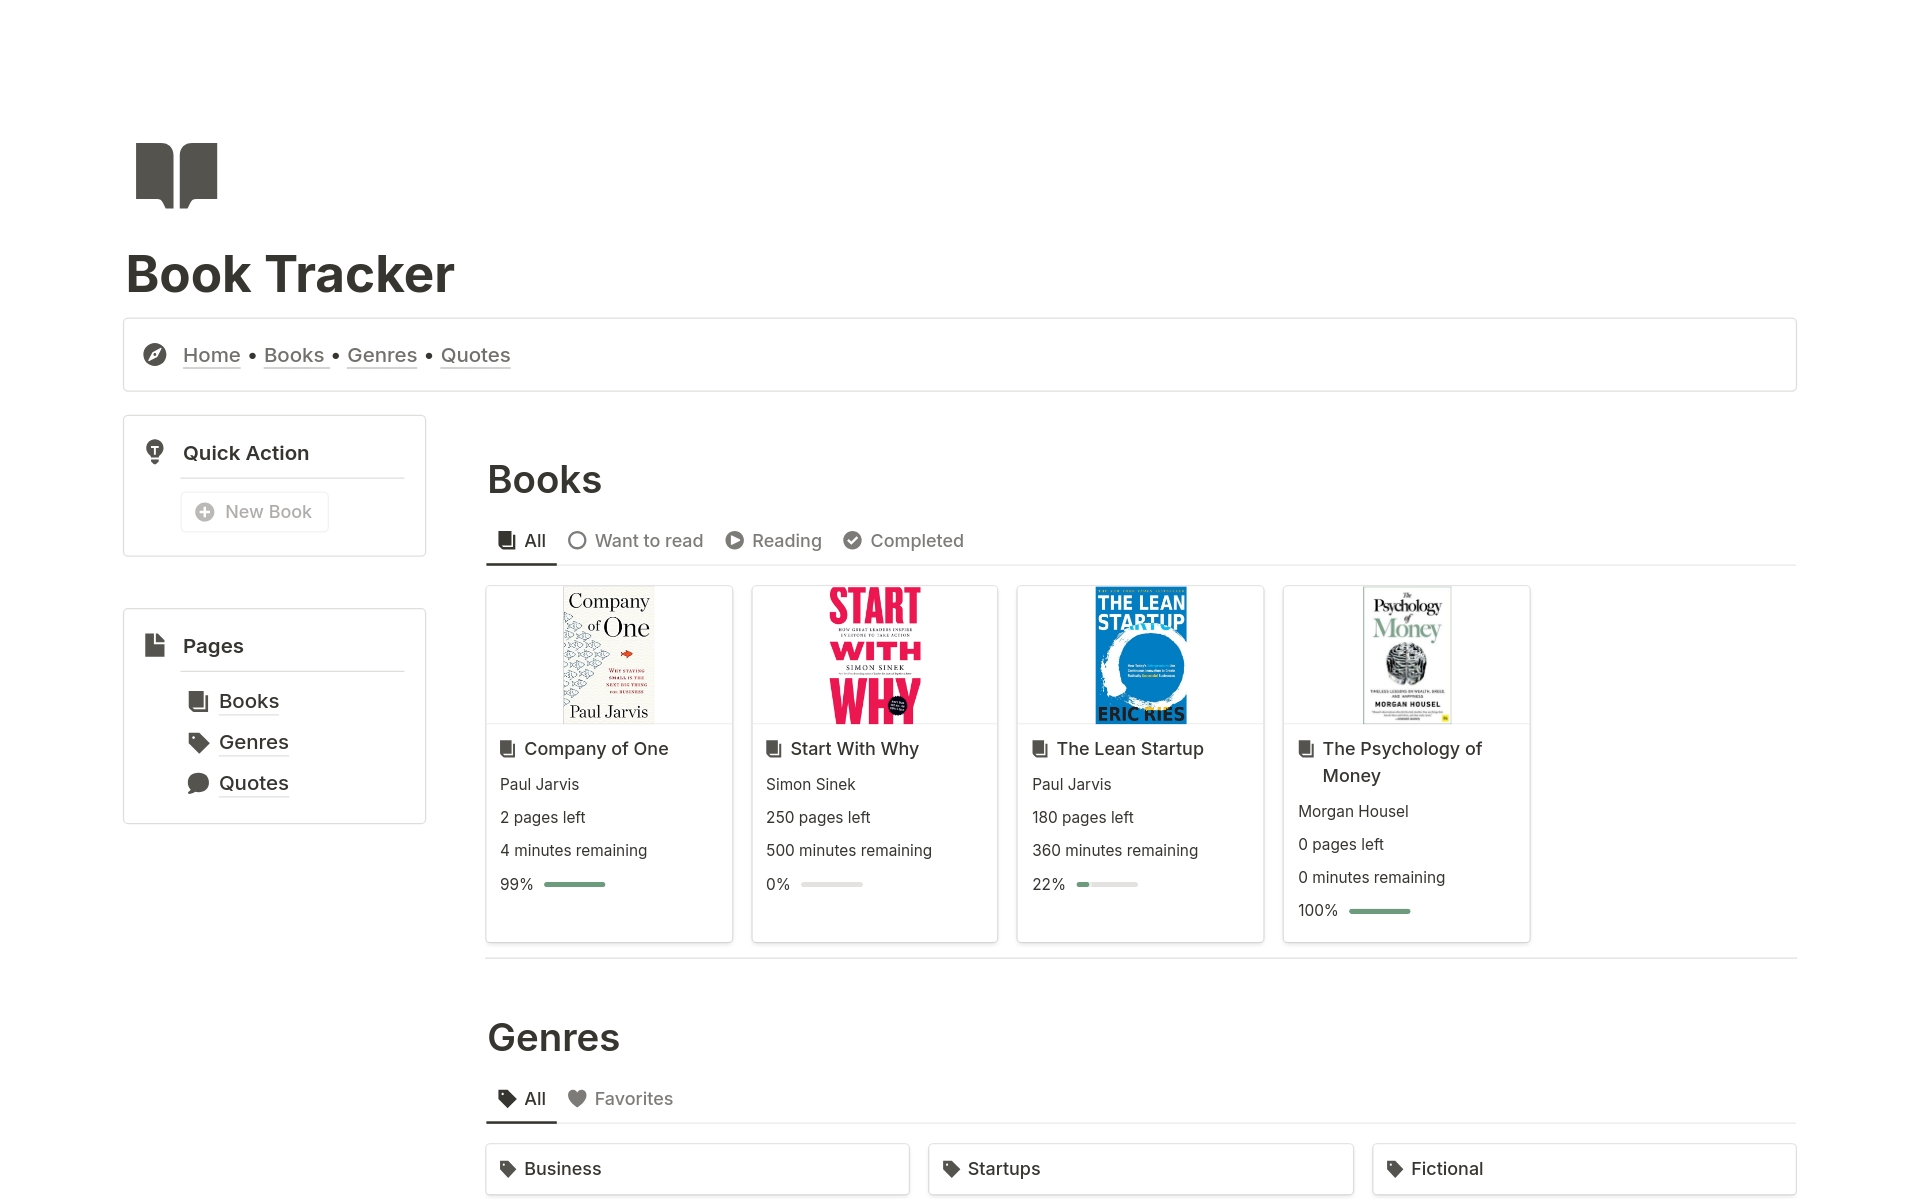 Introducing the Notion book tracker template: your one-stop solution for organizing your reading journey. Say goodbye to scattered lists and effortlessly log your reads, track progress, and set goals.